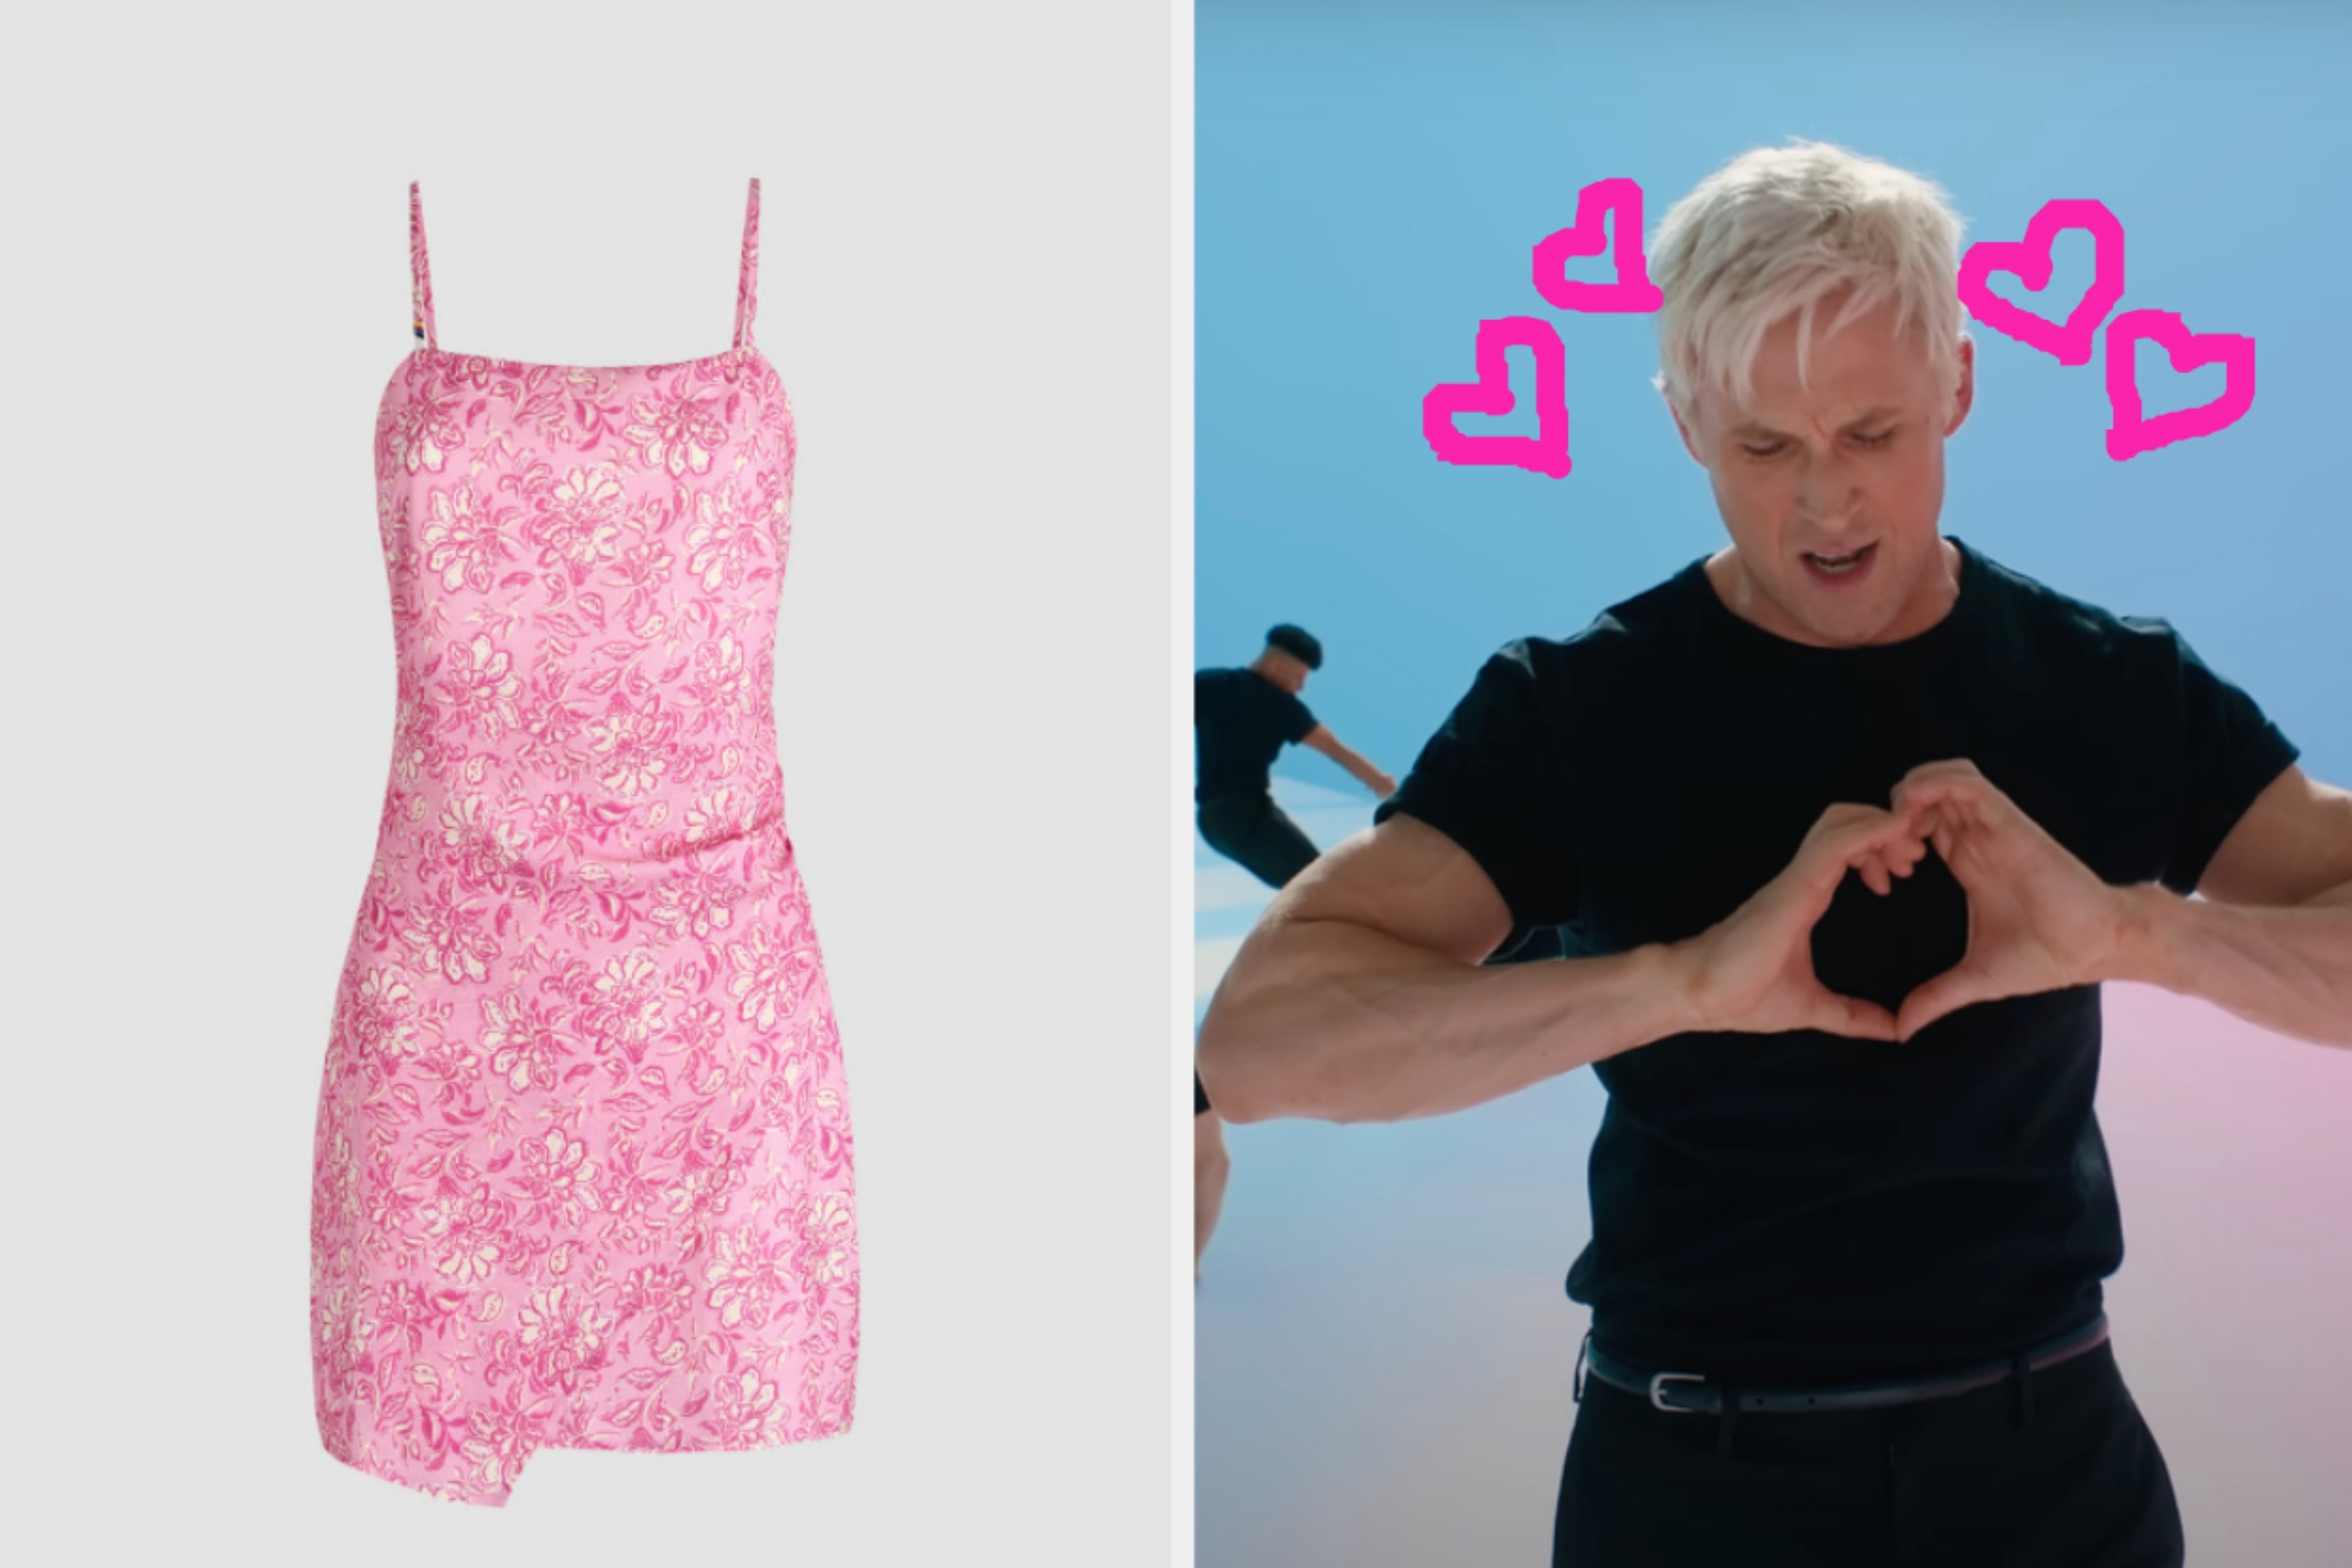 On the left, a floral mini dress, and on the right, Ryan Gosling making a hand heart as Ken in Barbie